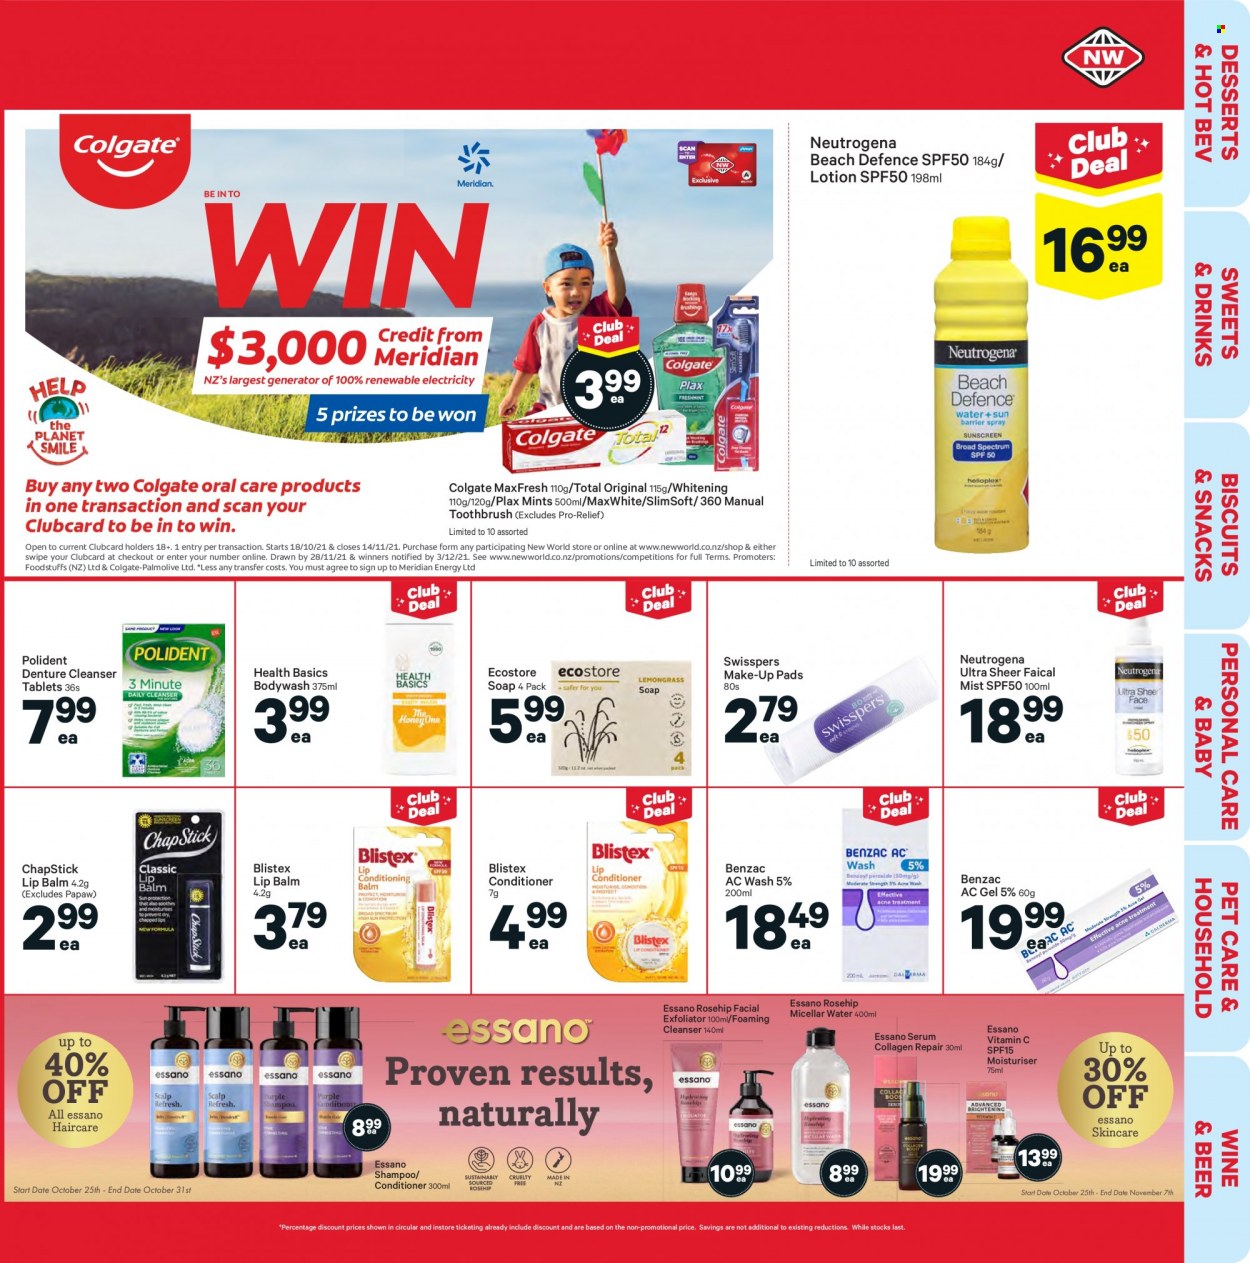 thumbnail - New World mailer - 25.10.2021 - 31.10.2021 - Sales products - snack, biscuit, wine, beer, shampoo, Palmolive, soap, Colgate, toothbrush, Plax, Polident, cleanser, lip balm, micellar water, Neutrogena, serum, conditioner, Essano, body lotion, makeup. Page 25.